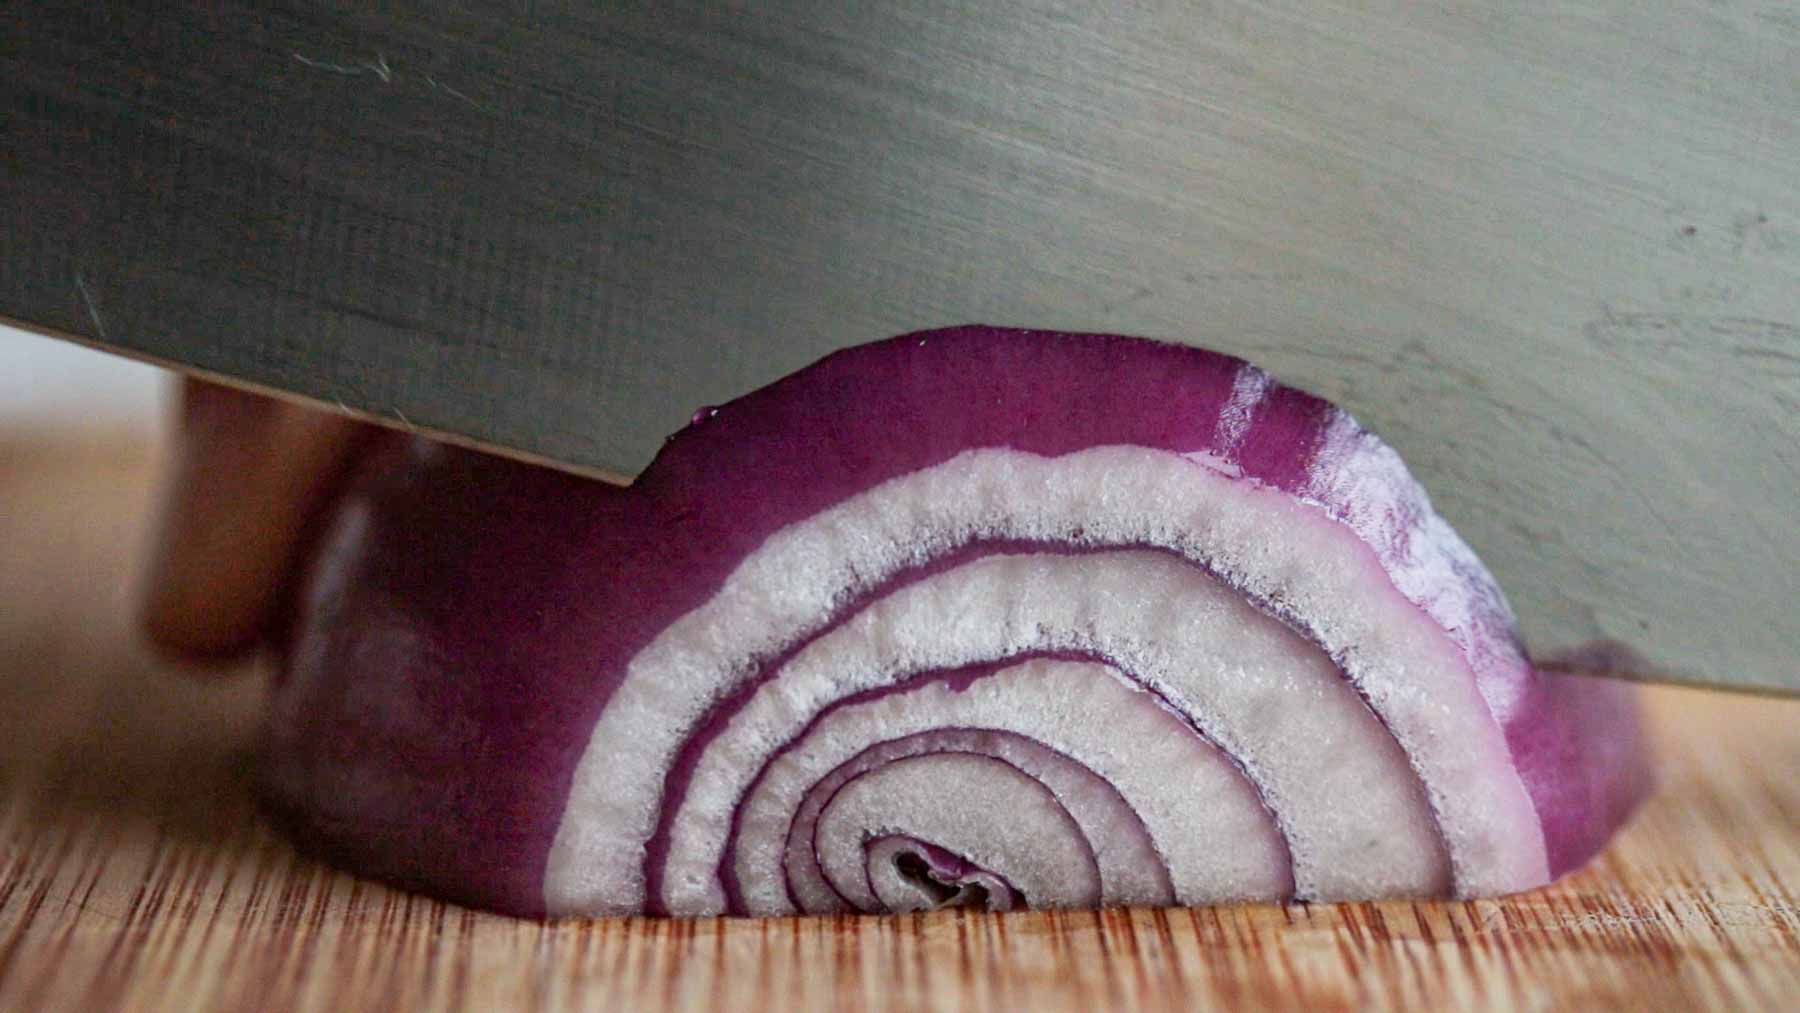 Knife slicing a red onion into half-moon slices.